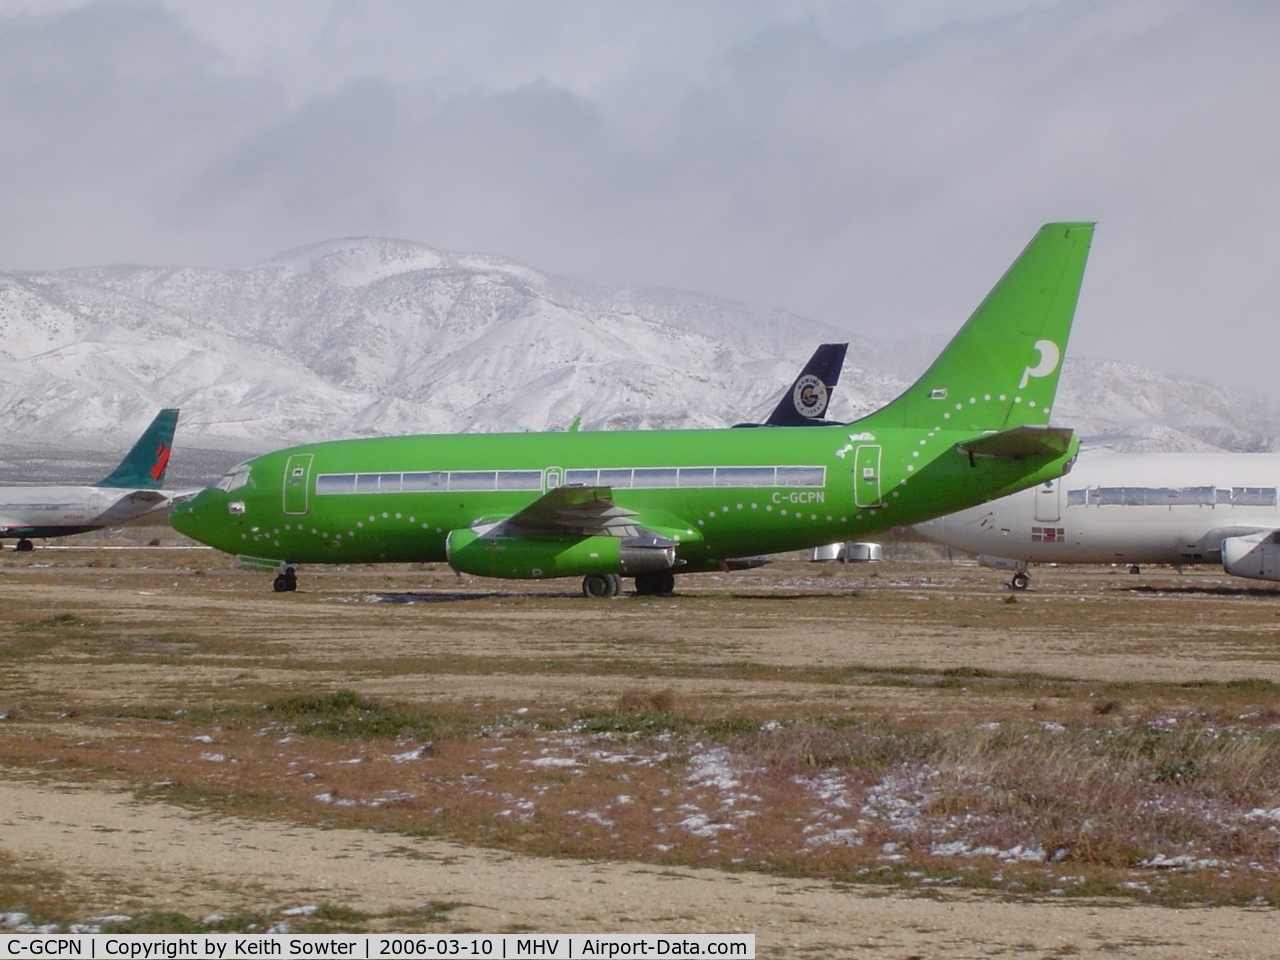 C-GCPN, 1979 Boeing 737-217 C/N 21717, Parked at Mojave